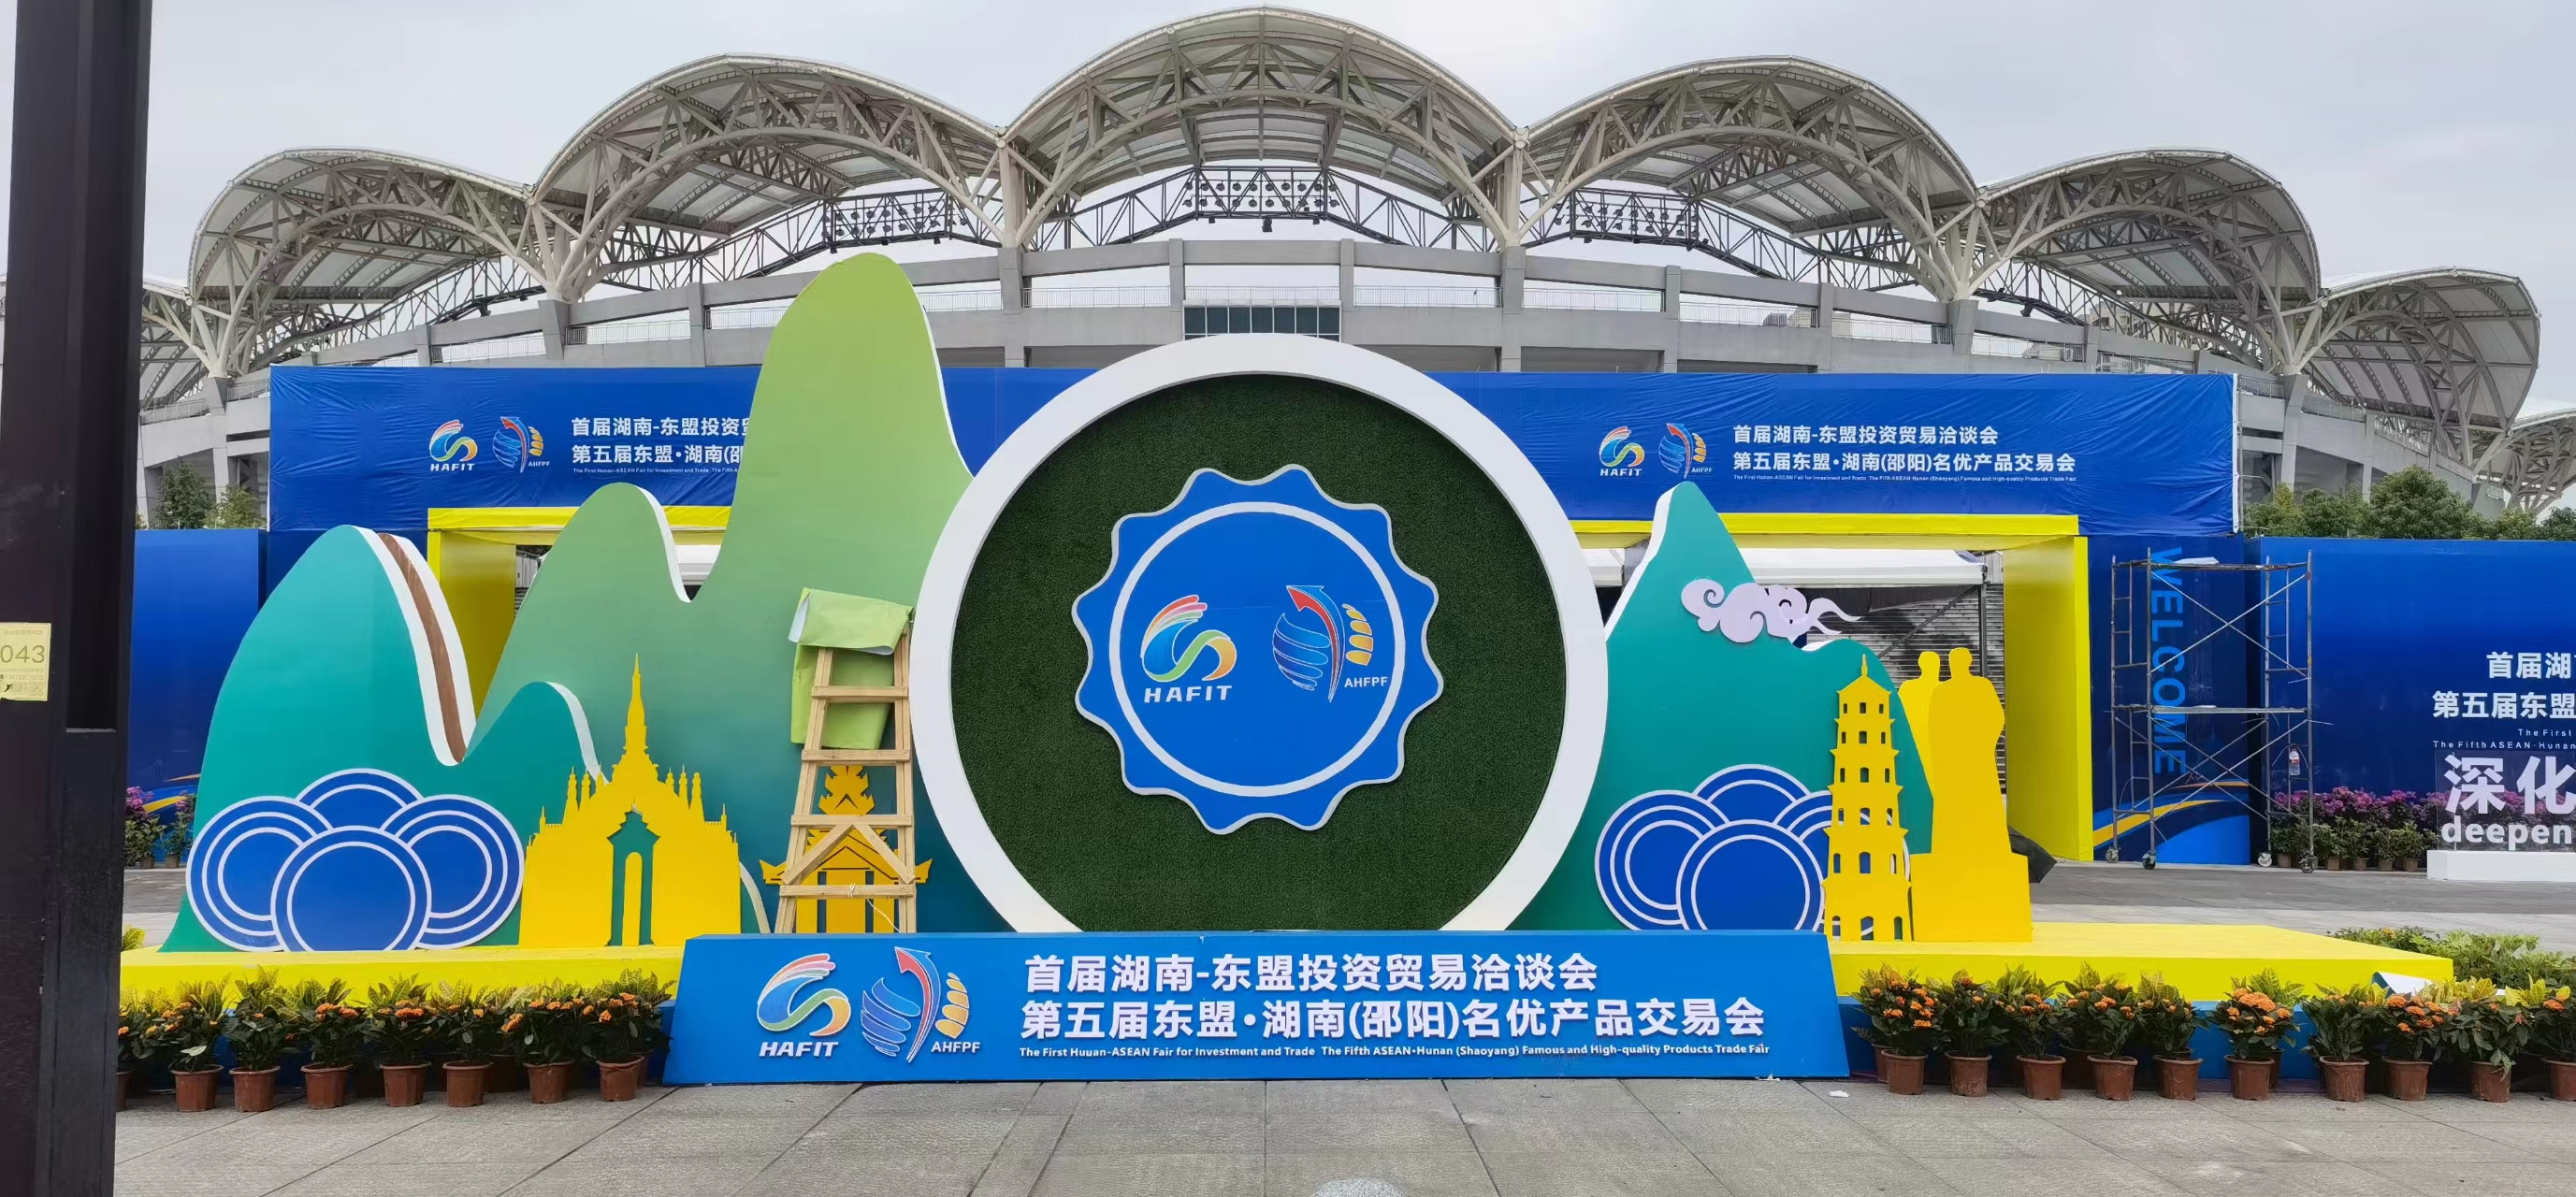 The First Hunan-ASEAN Investment and Trade Fair opened in Shaoyang